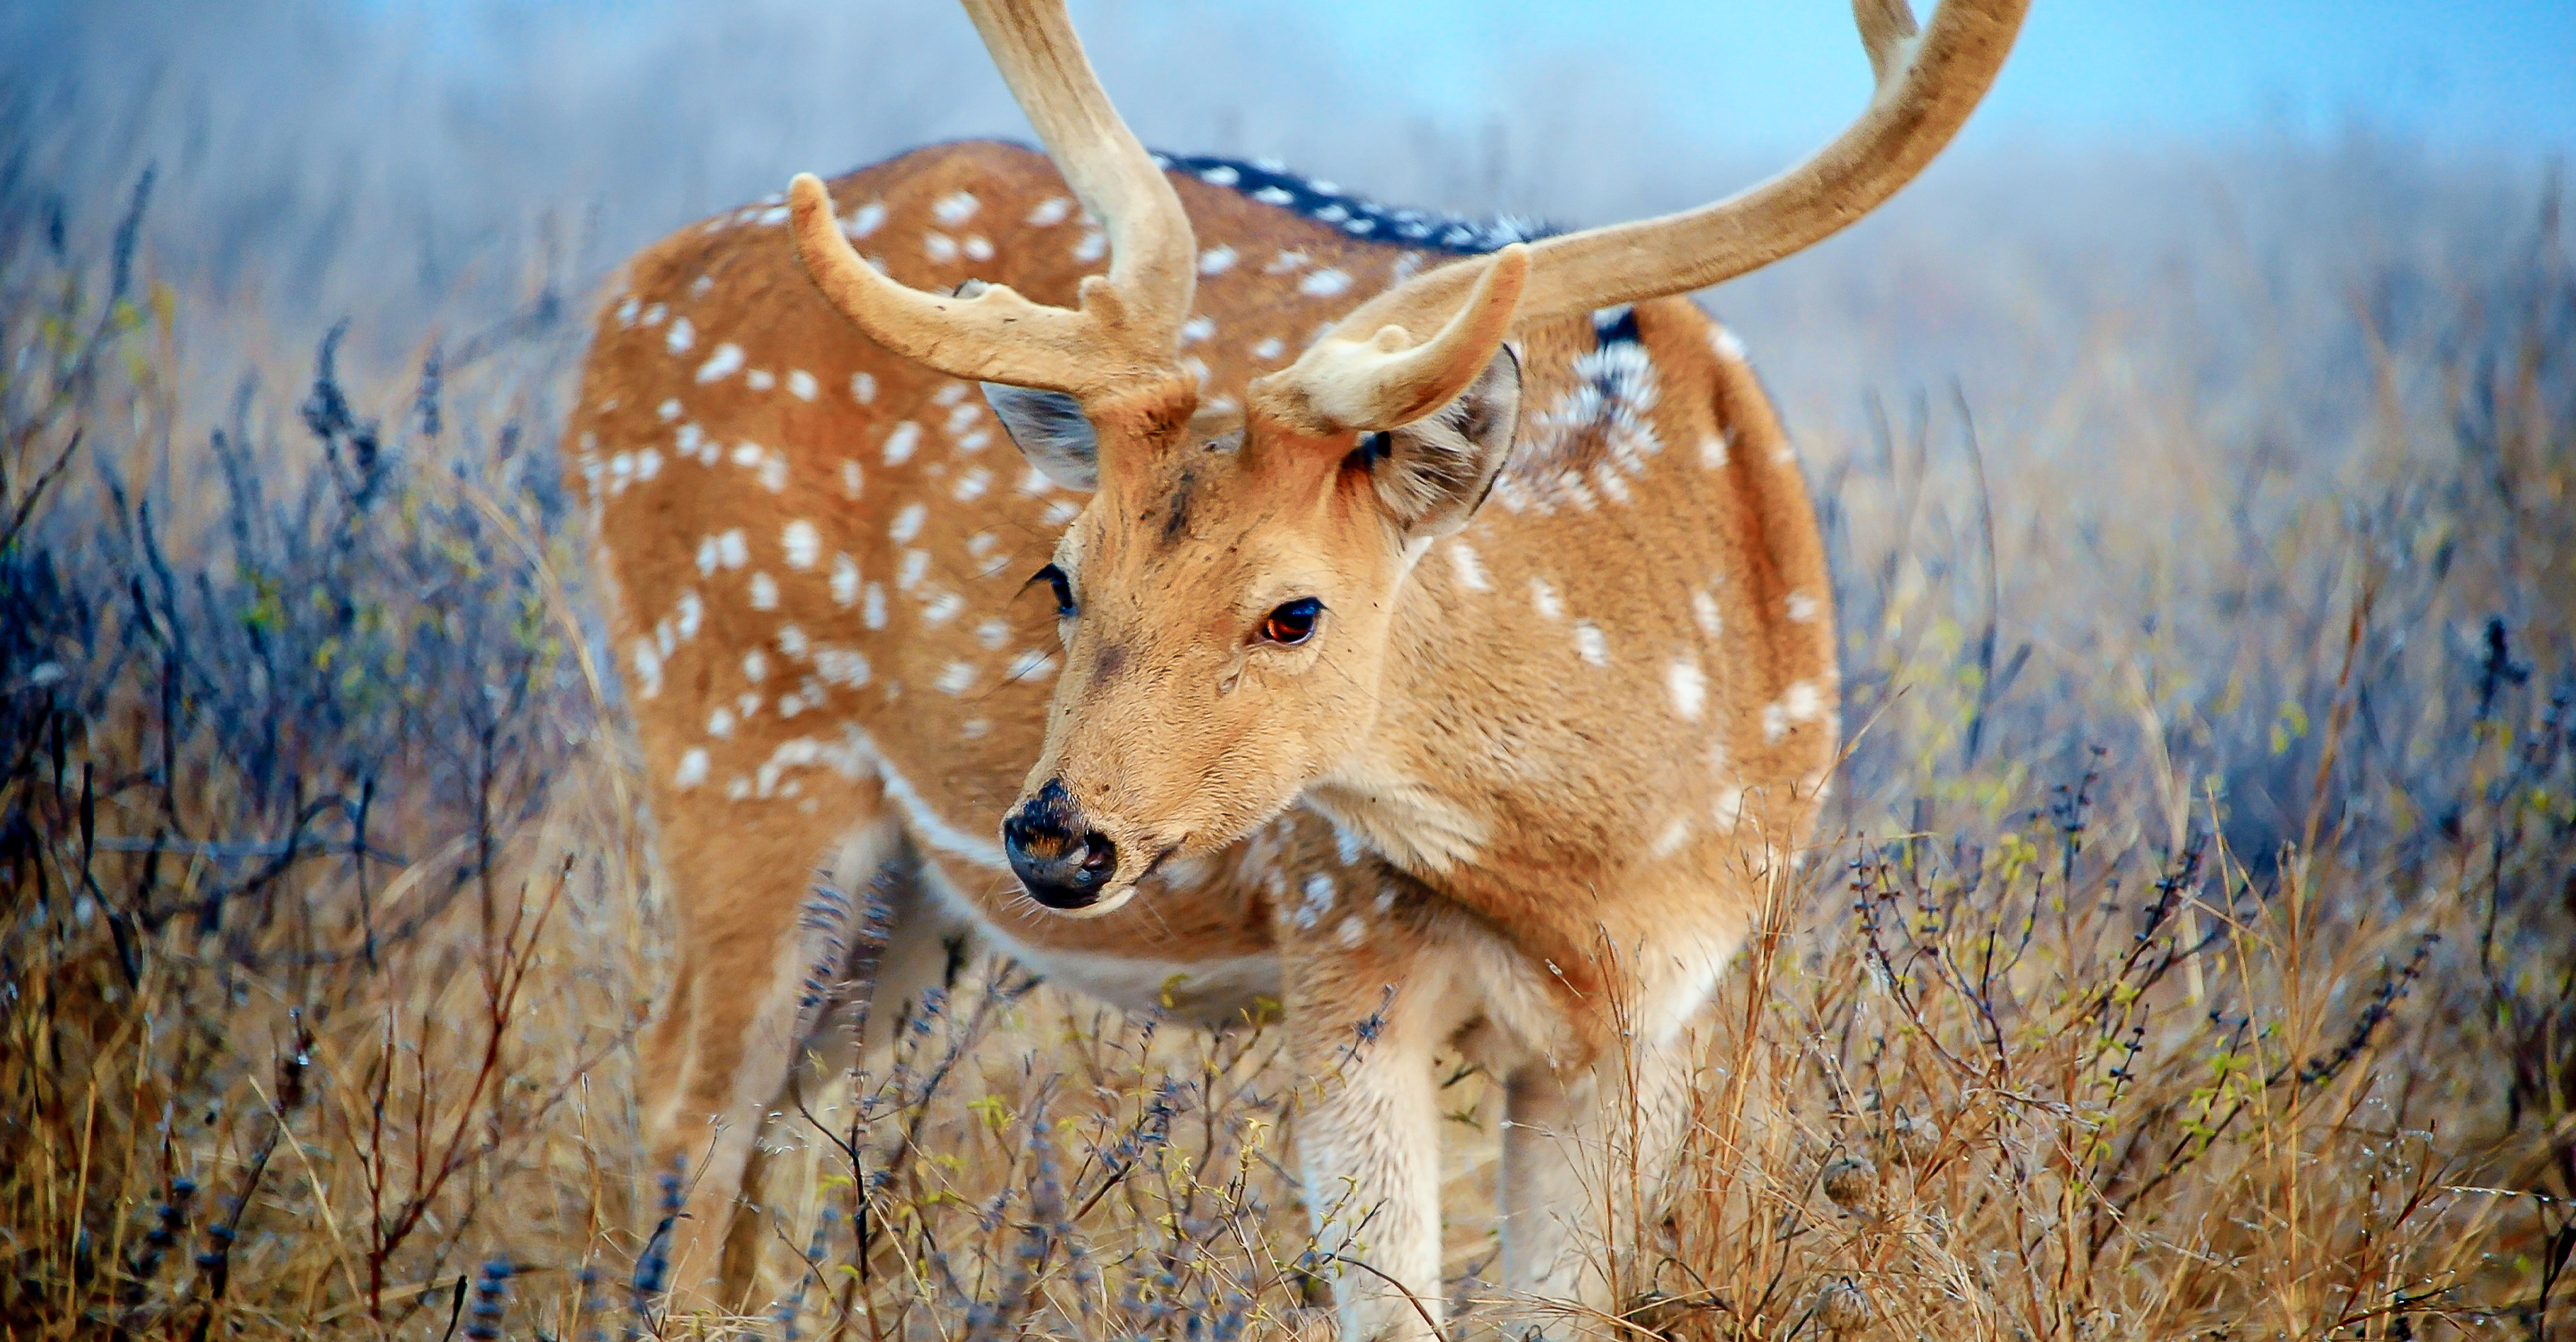 Close-up of a male spotted deer or cheetal in Ranthambore National Park, India